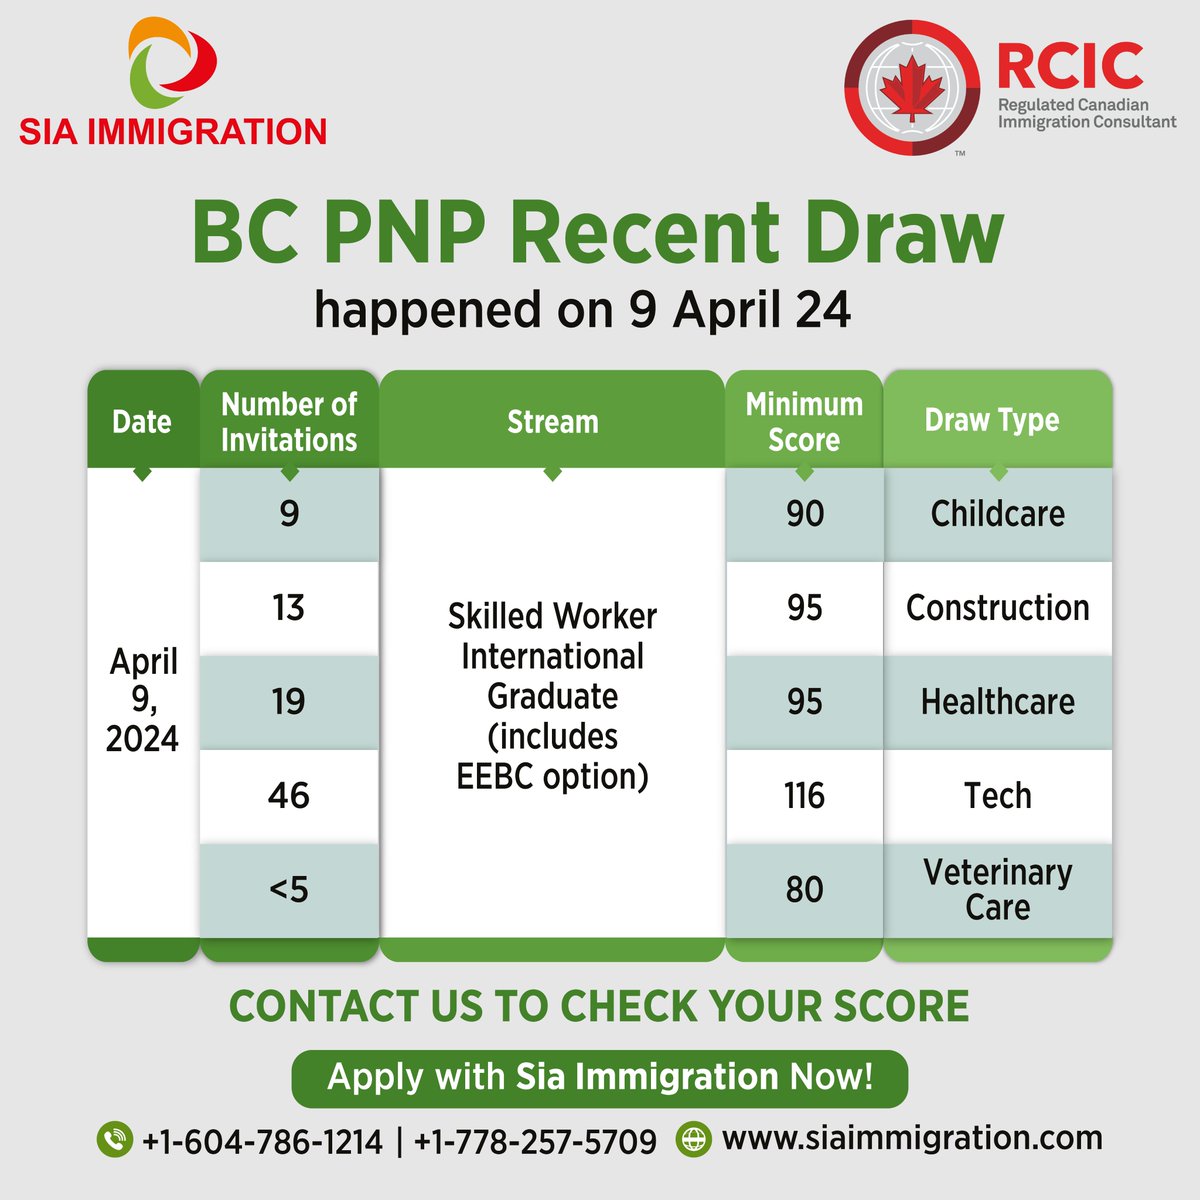 The BC PNP recent draw happened on 9 April 2024.

Apply with Sia Immigration Now @ +1-604-786-1214, +1-778-257-5709

visit: siaimmigration.com
#BCPNP #bcpnpDraw #PNPDraw2024 #9April #LatestDrawPNP #BritishColumbia #ProvinceNomineeProgram #SkilledImmigration #SkilledWorkers